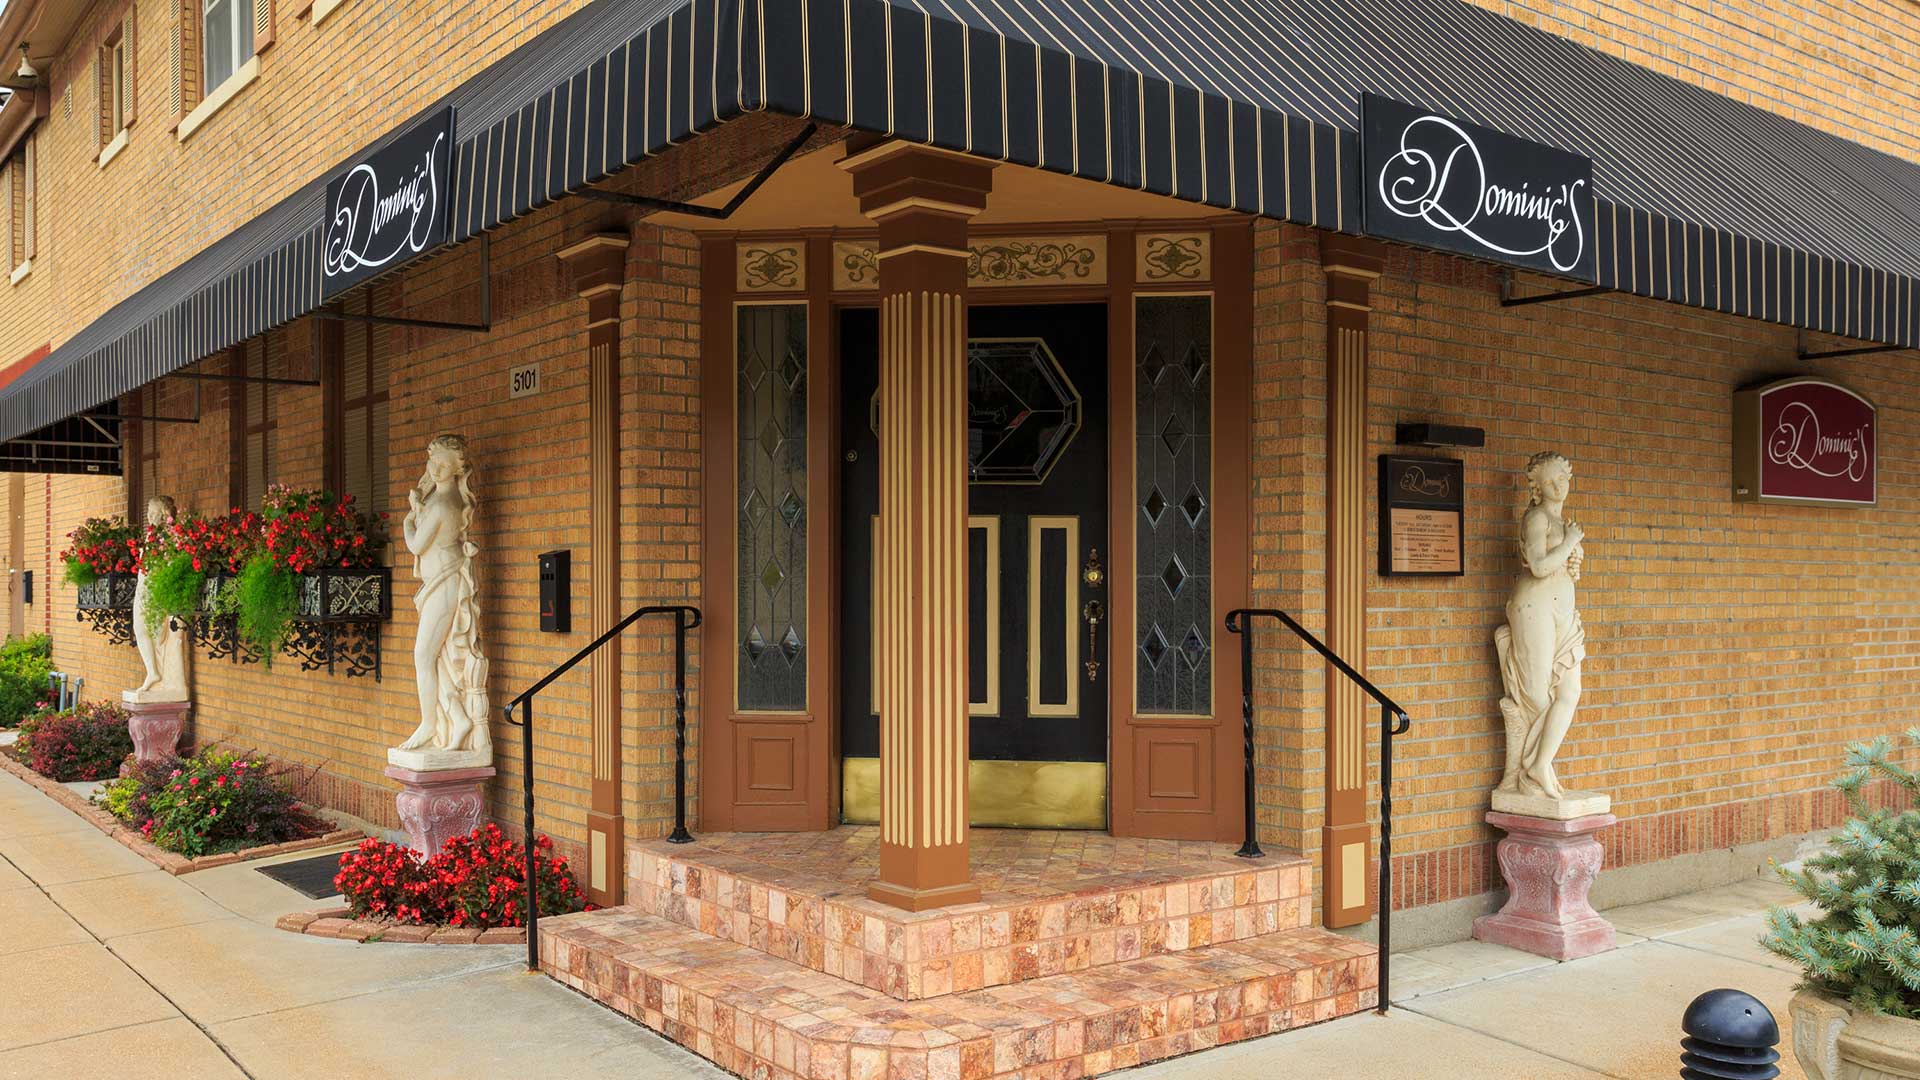 The front door of a classic Italian restaurant. The building is yellow brick with a black awning hanging. There are old-world statues and flowers lining the walls on both sides of the entrance.